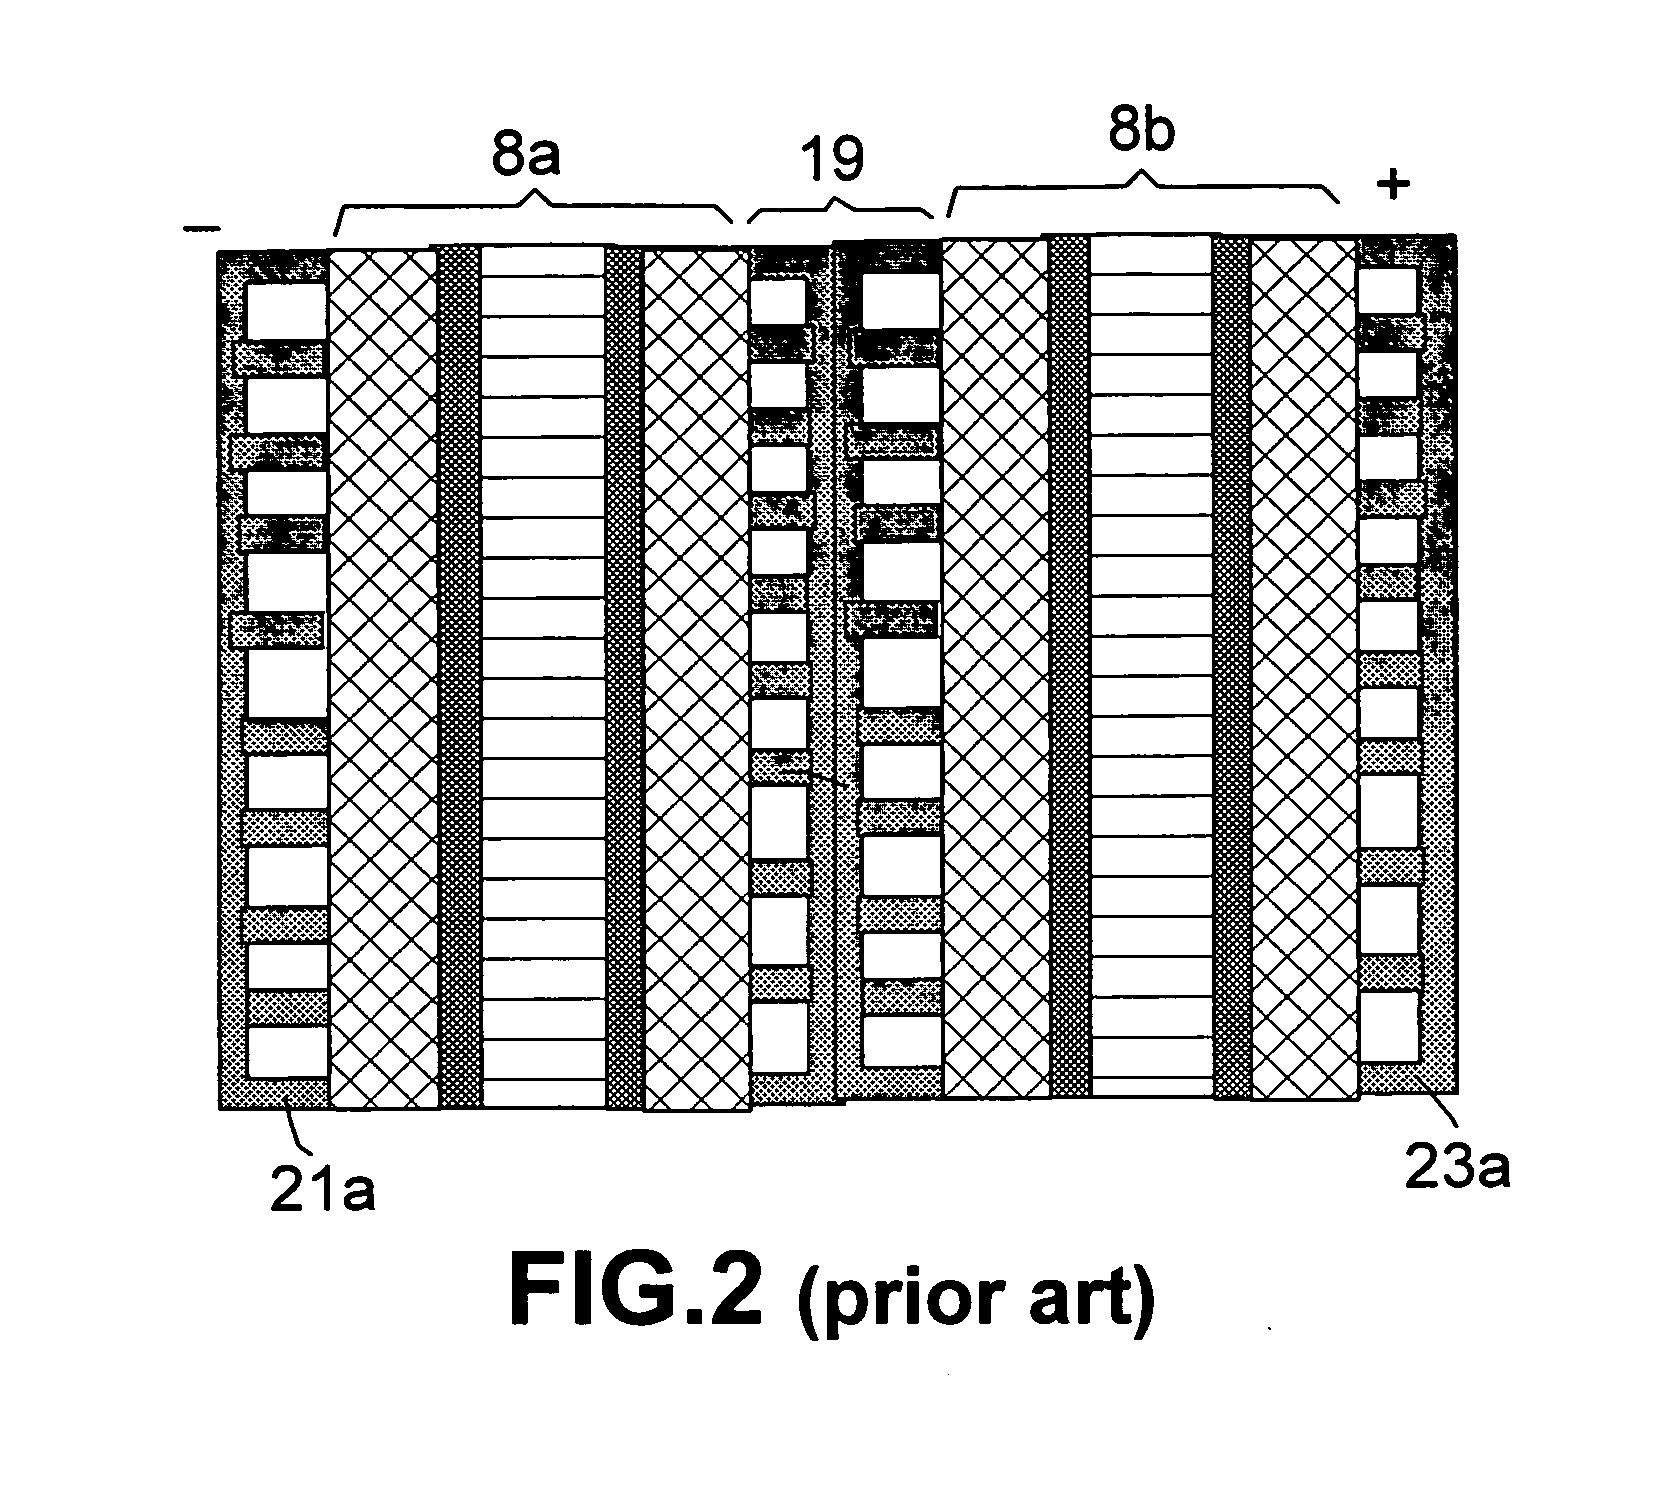 Highly conductive composites for fuel cell flow field plates and bipolar plates